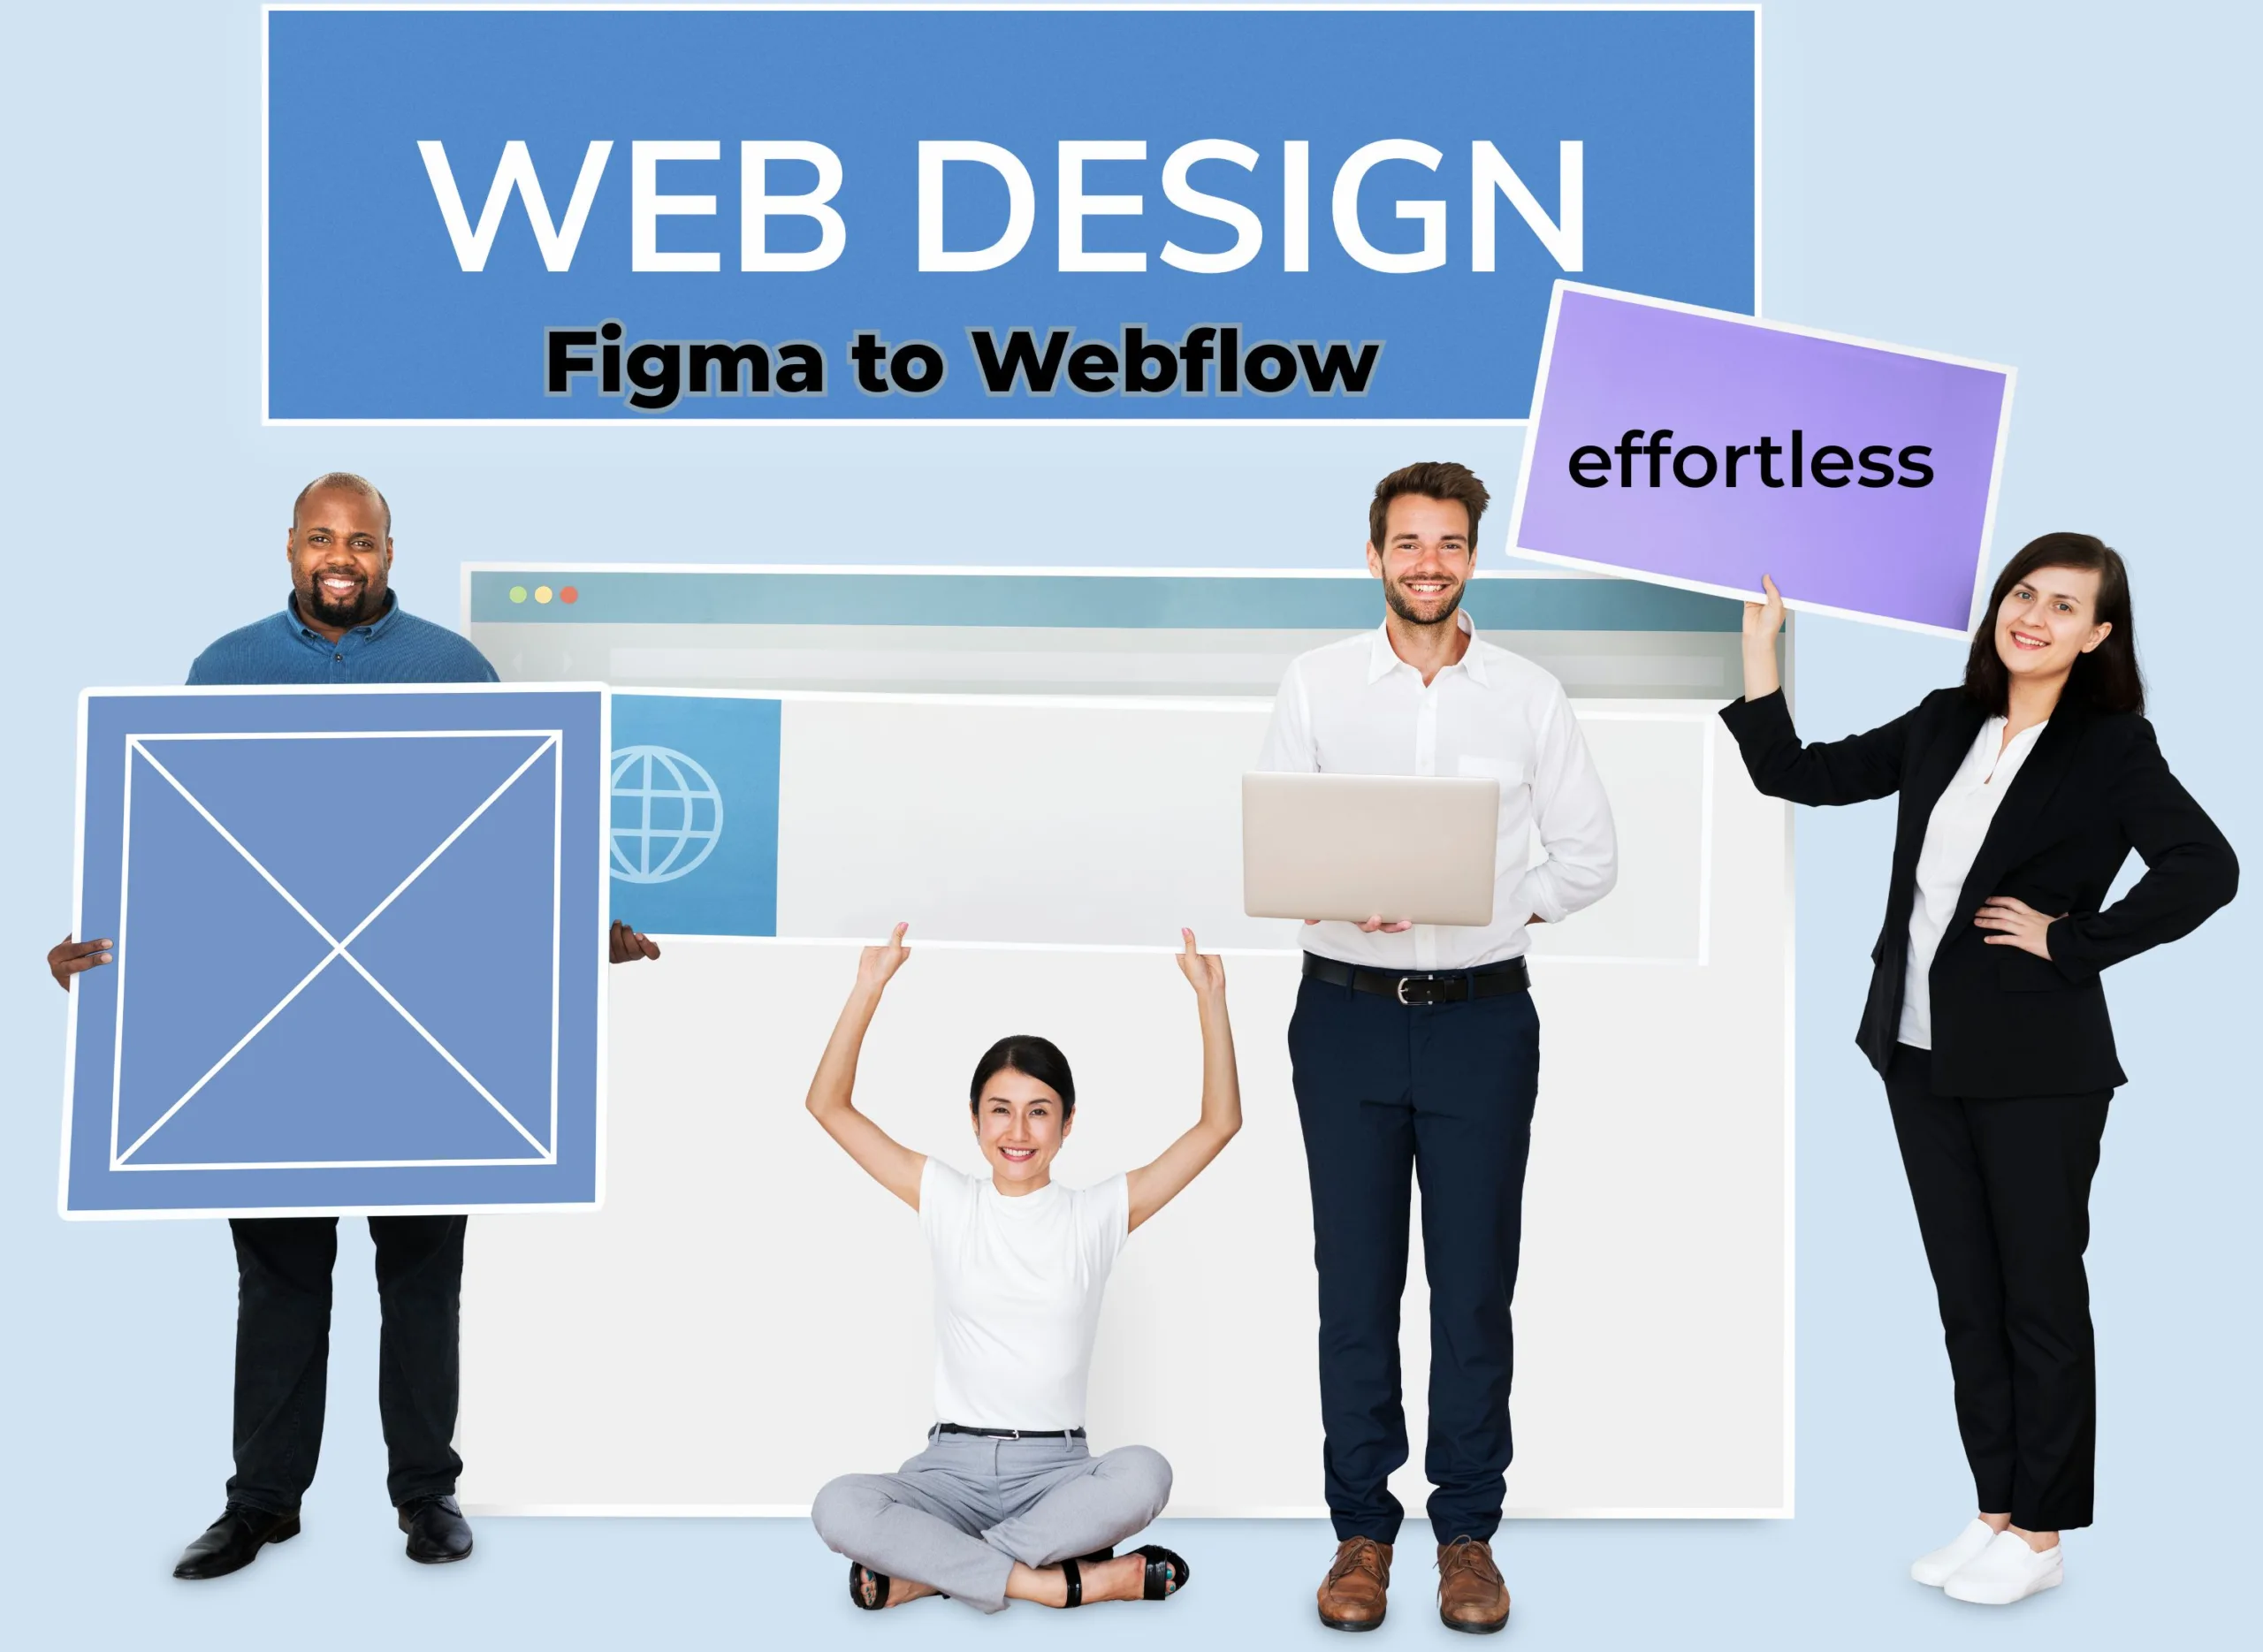 From Figma to Webflow: Creating Websites Made Effortless